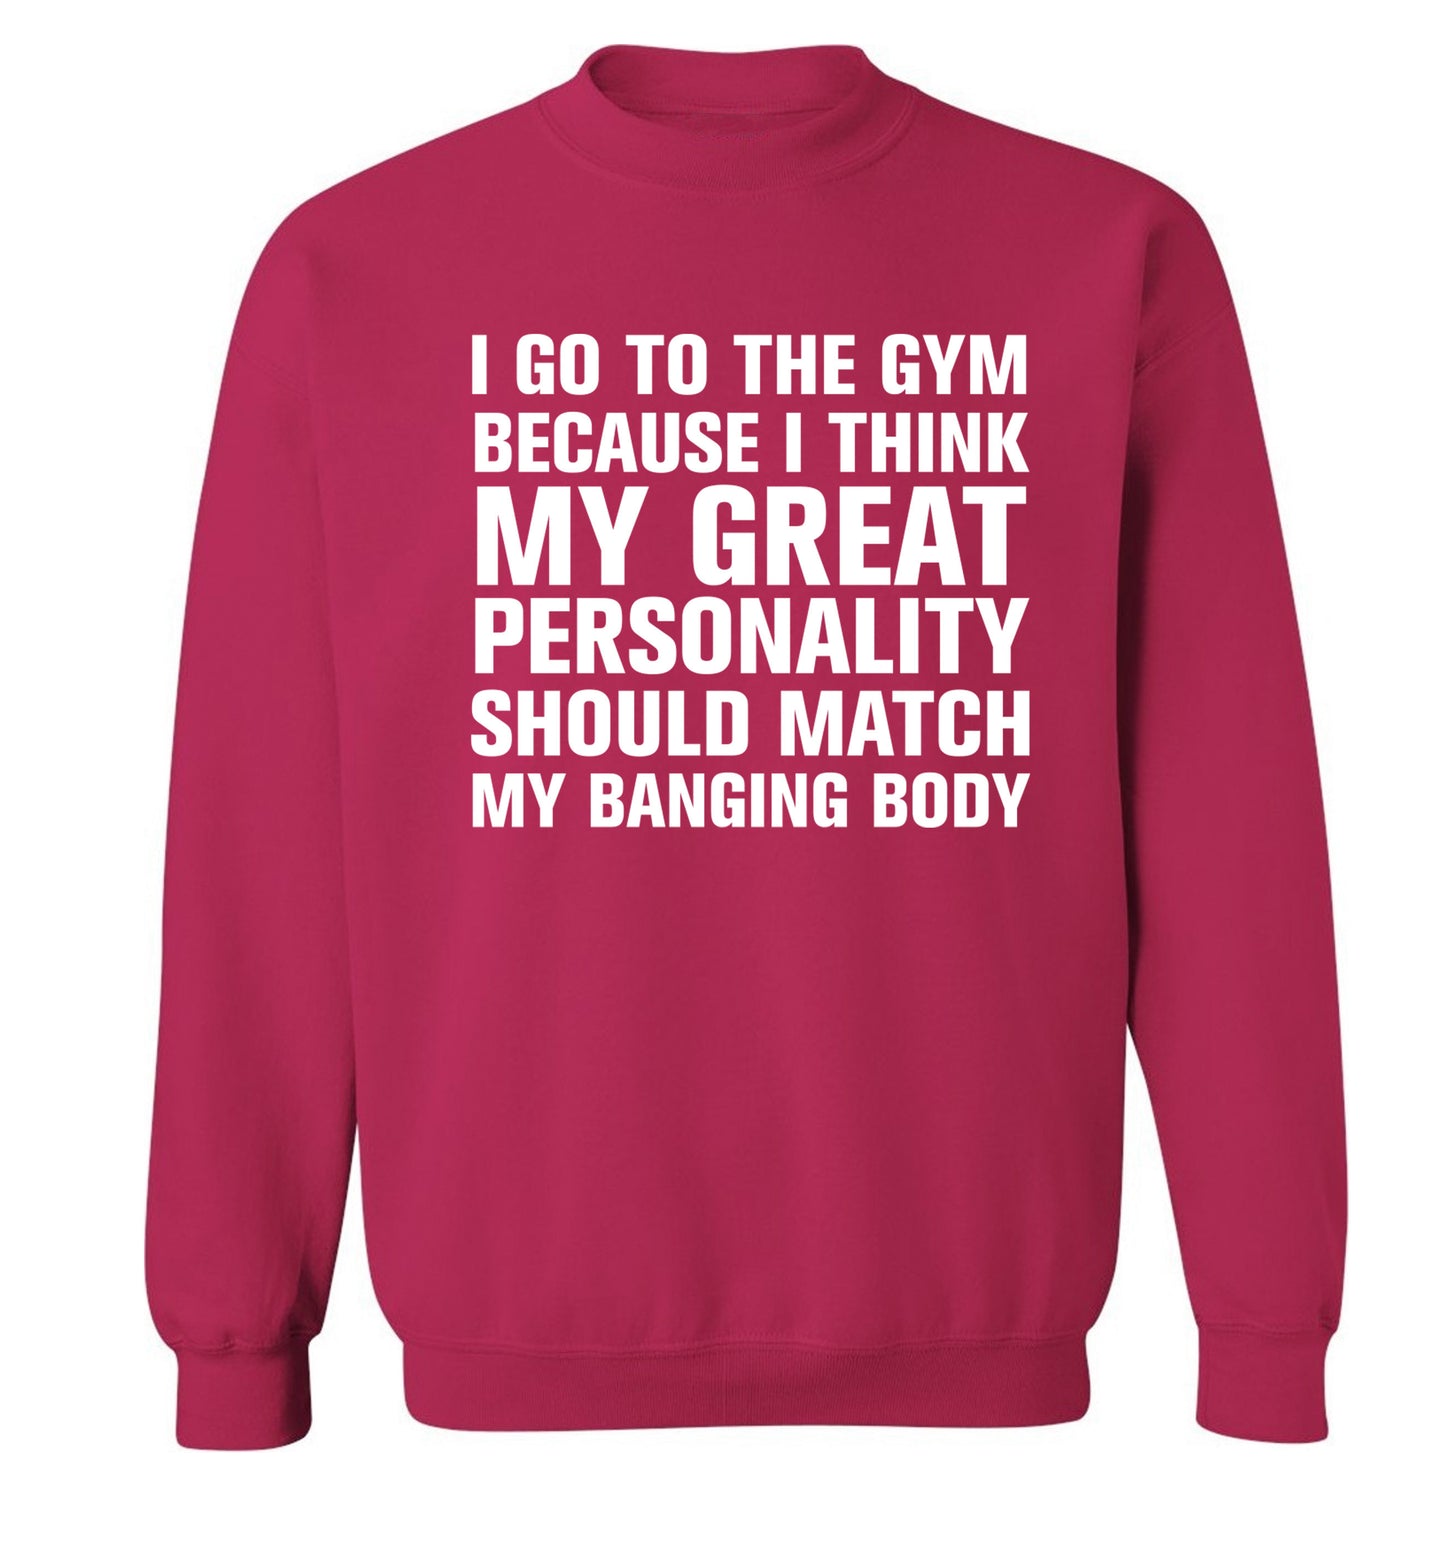 I go to the gym because I think my great personality should match my banging body Adult's unisex pink Sweater XL